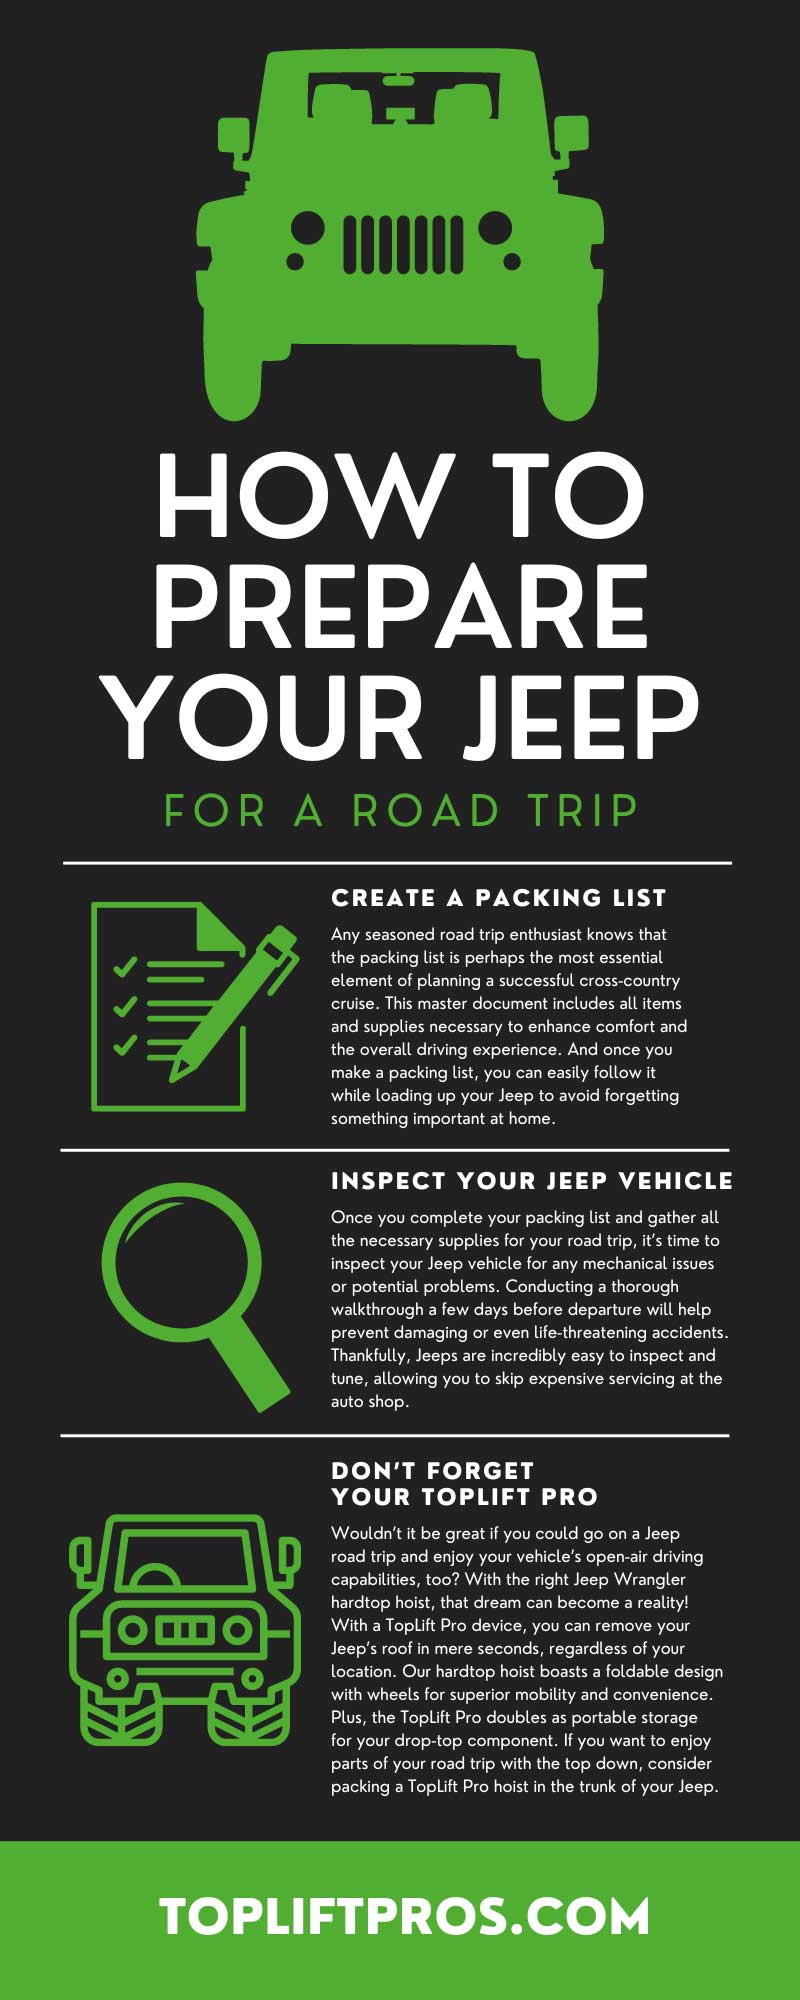 How To Prepare Your Jeep for a Road Trip